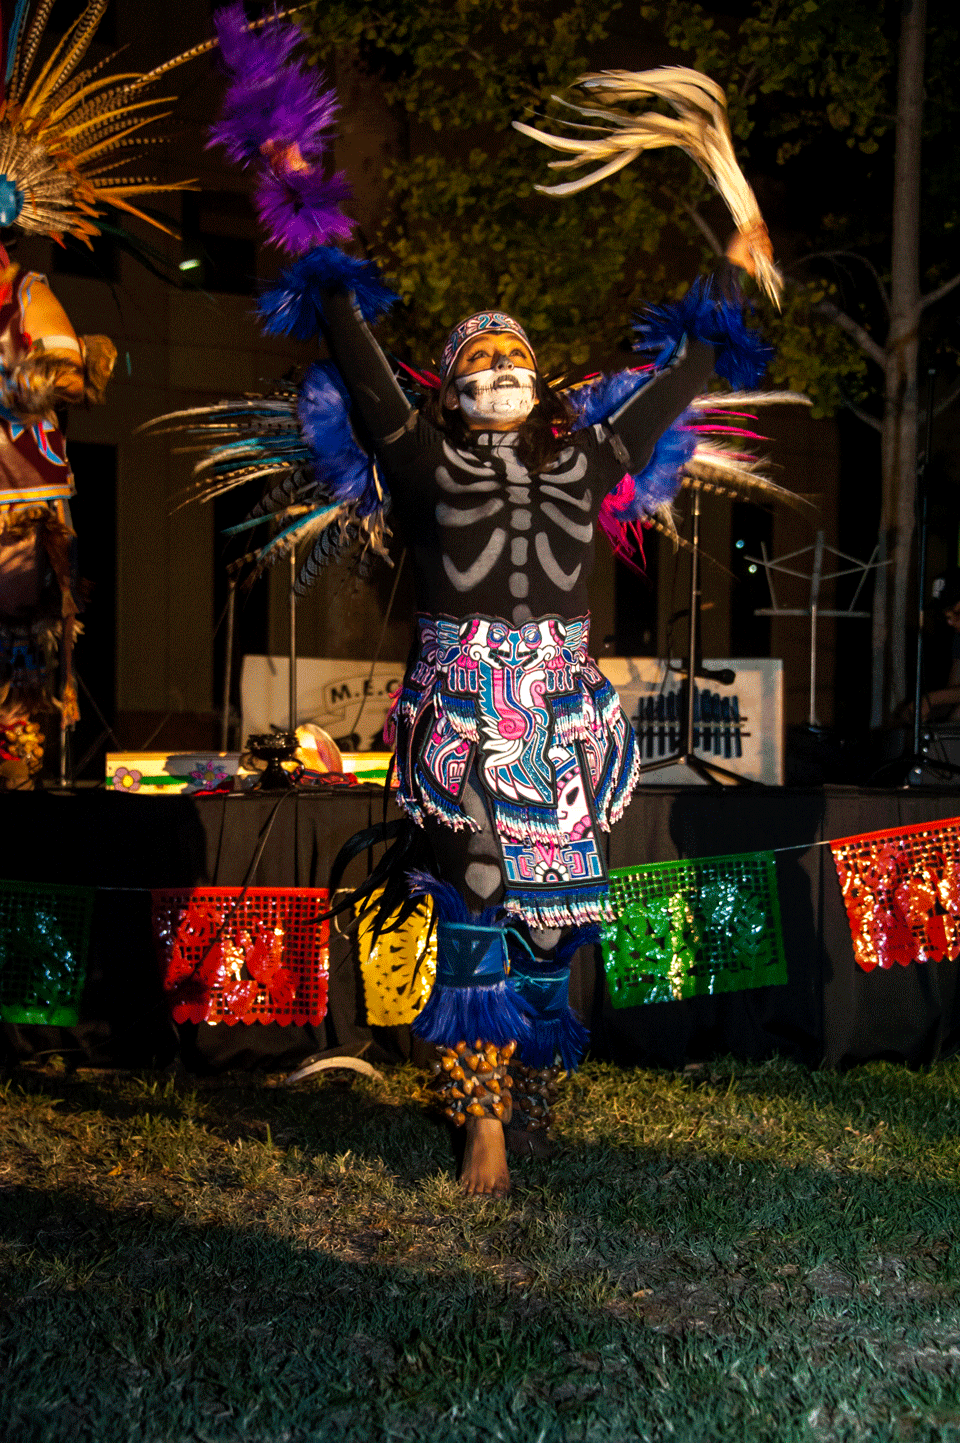 Performers wear traditional Día de los Muertos attire at the annual CSUN celebration in honor of the Mexican holiday, Oct. 30, 2015. Photo by Ruth Saravia.